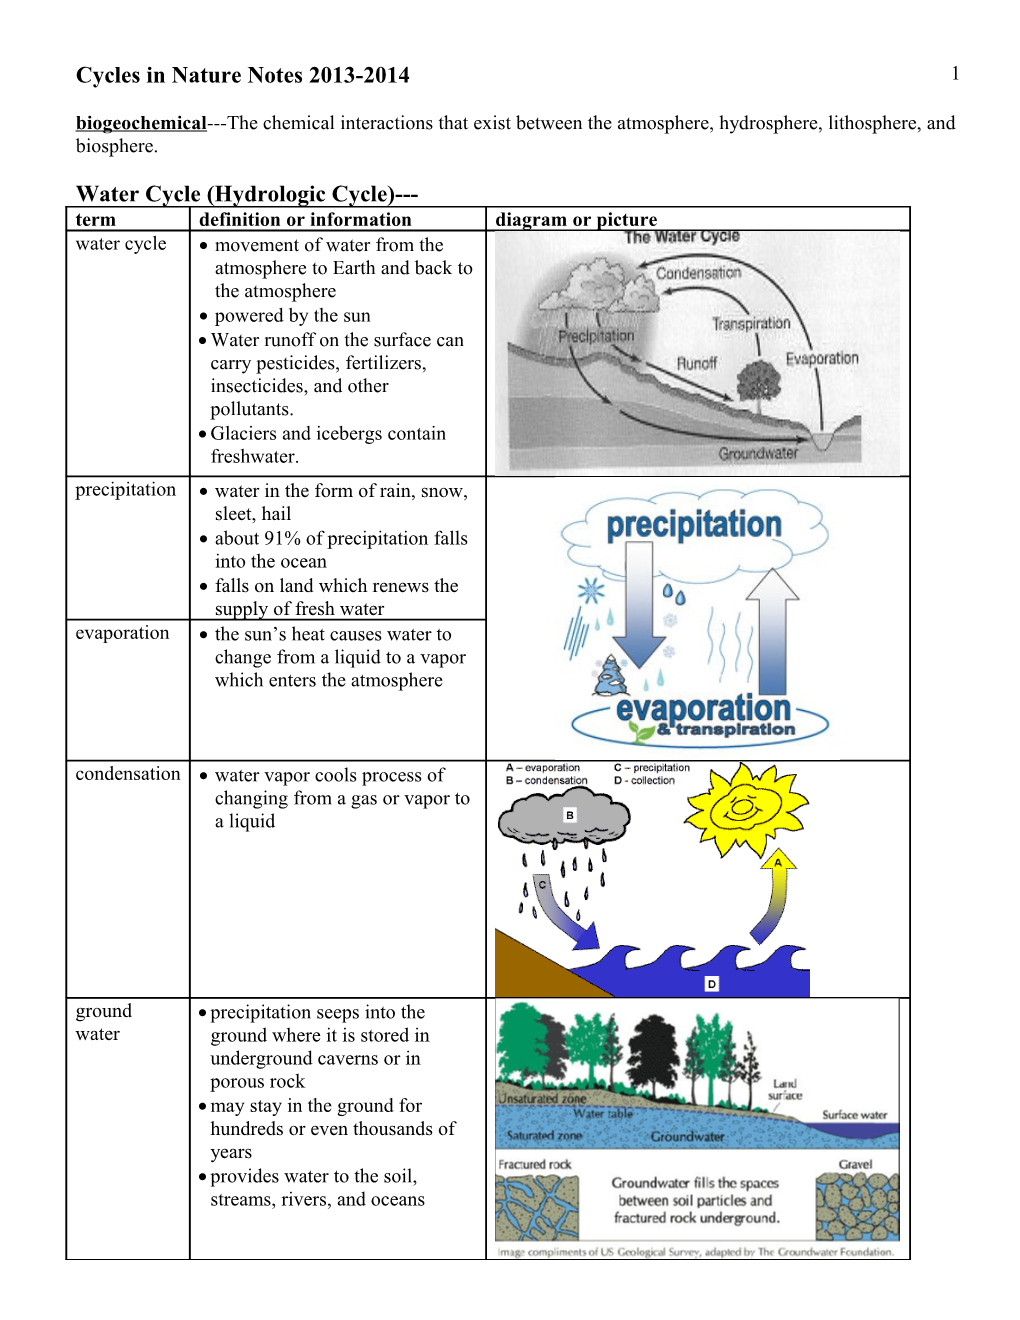 Biogeochemical the Chemical Interactions That Exist Between the Atmosphere, Hydrosphere